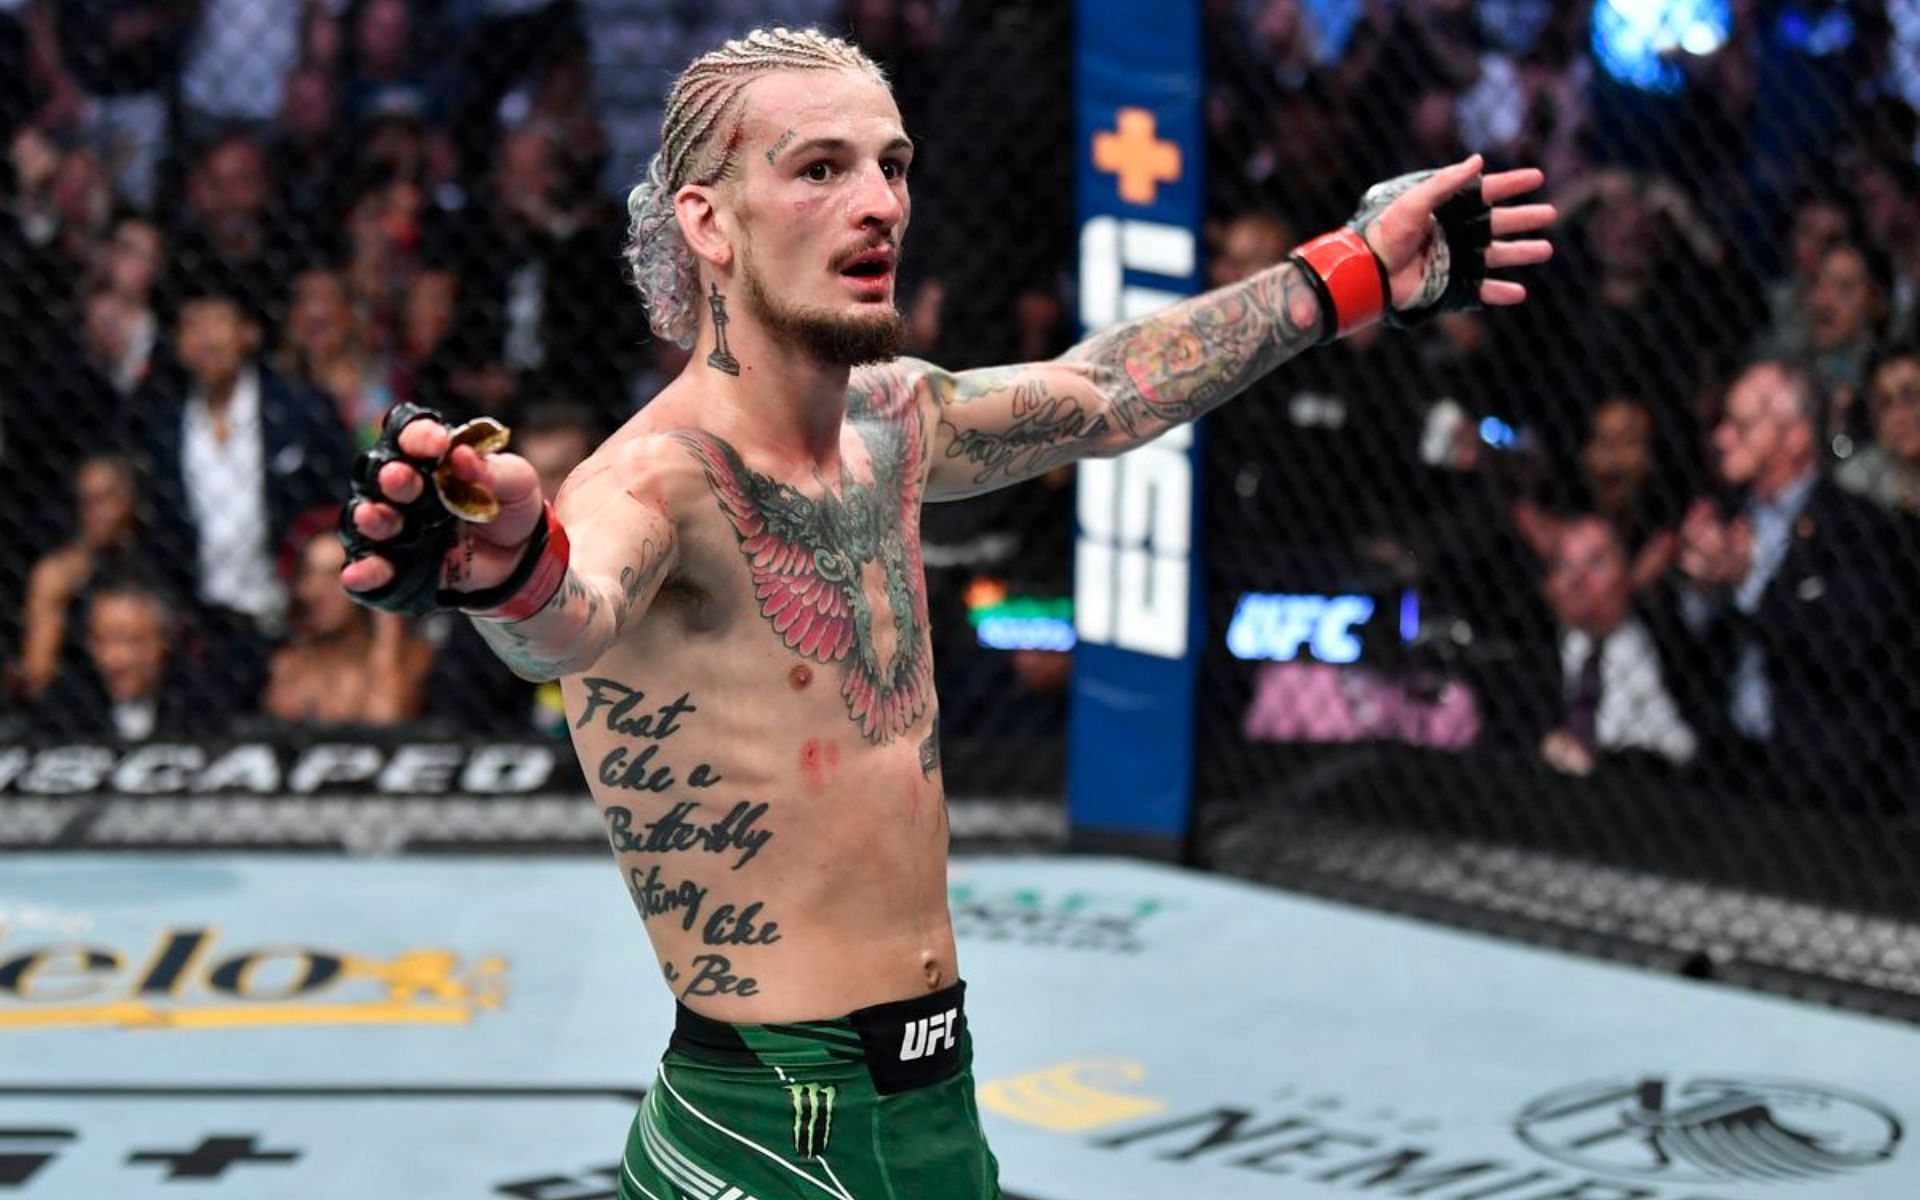 5 UFC fighters who sport wacky hairstyles